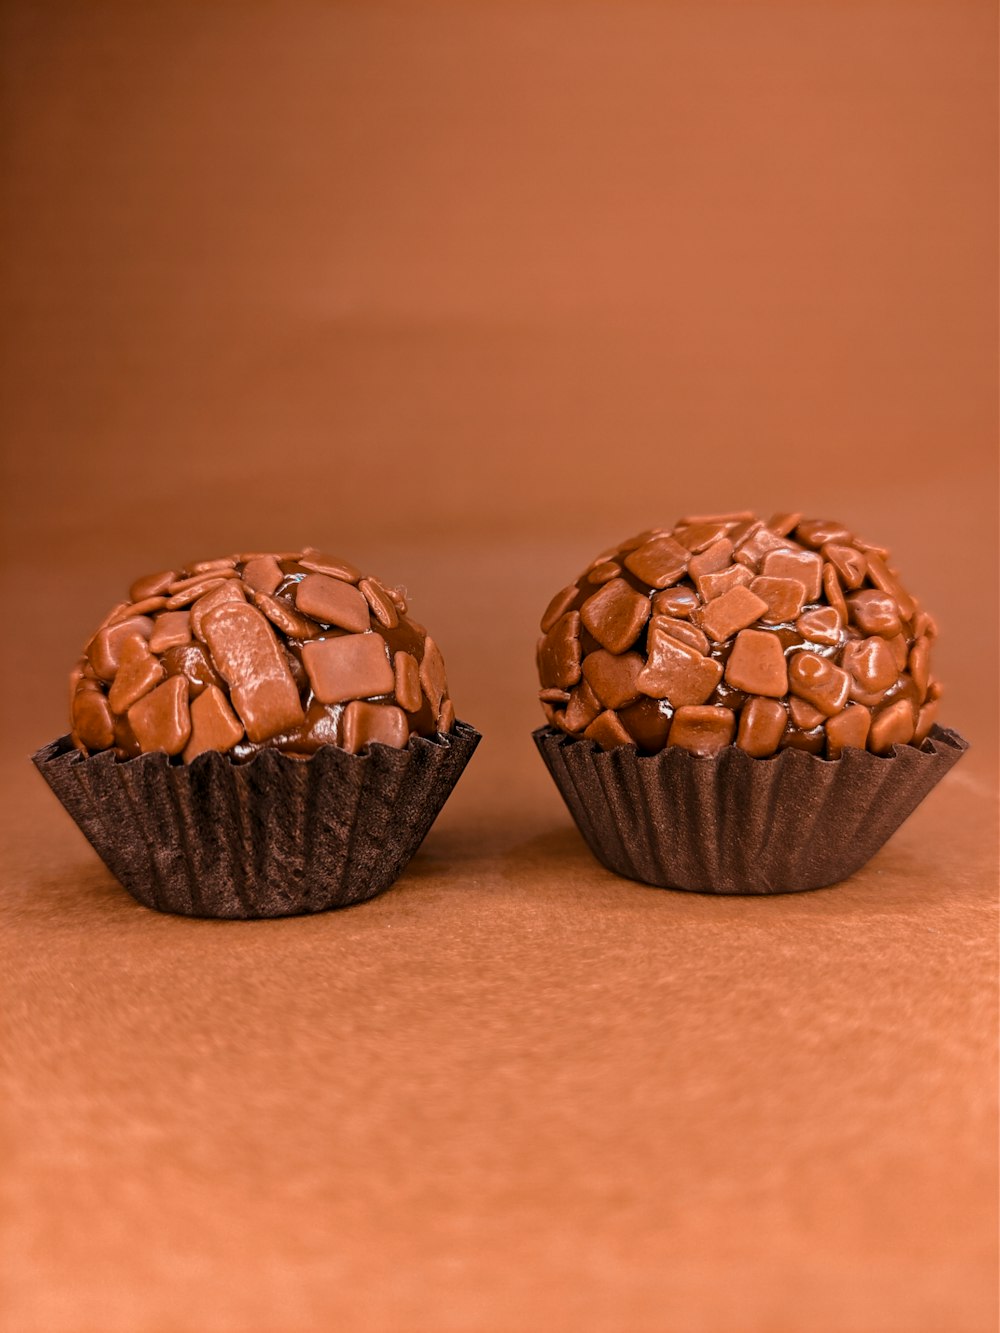 three chocolate cupcakes on brown wooden table